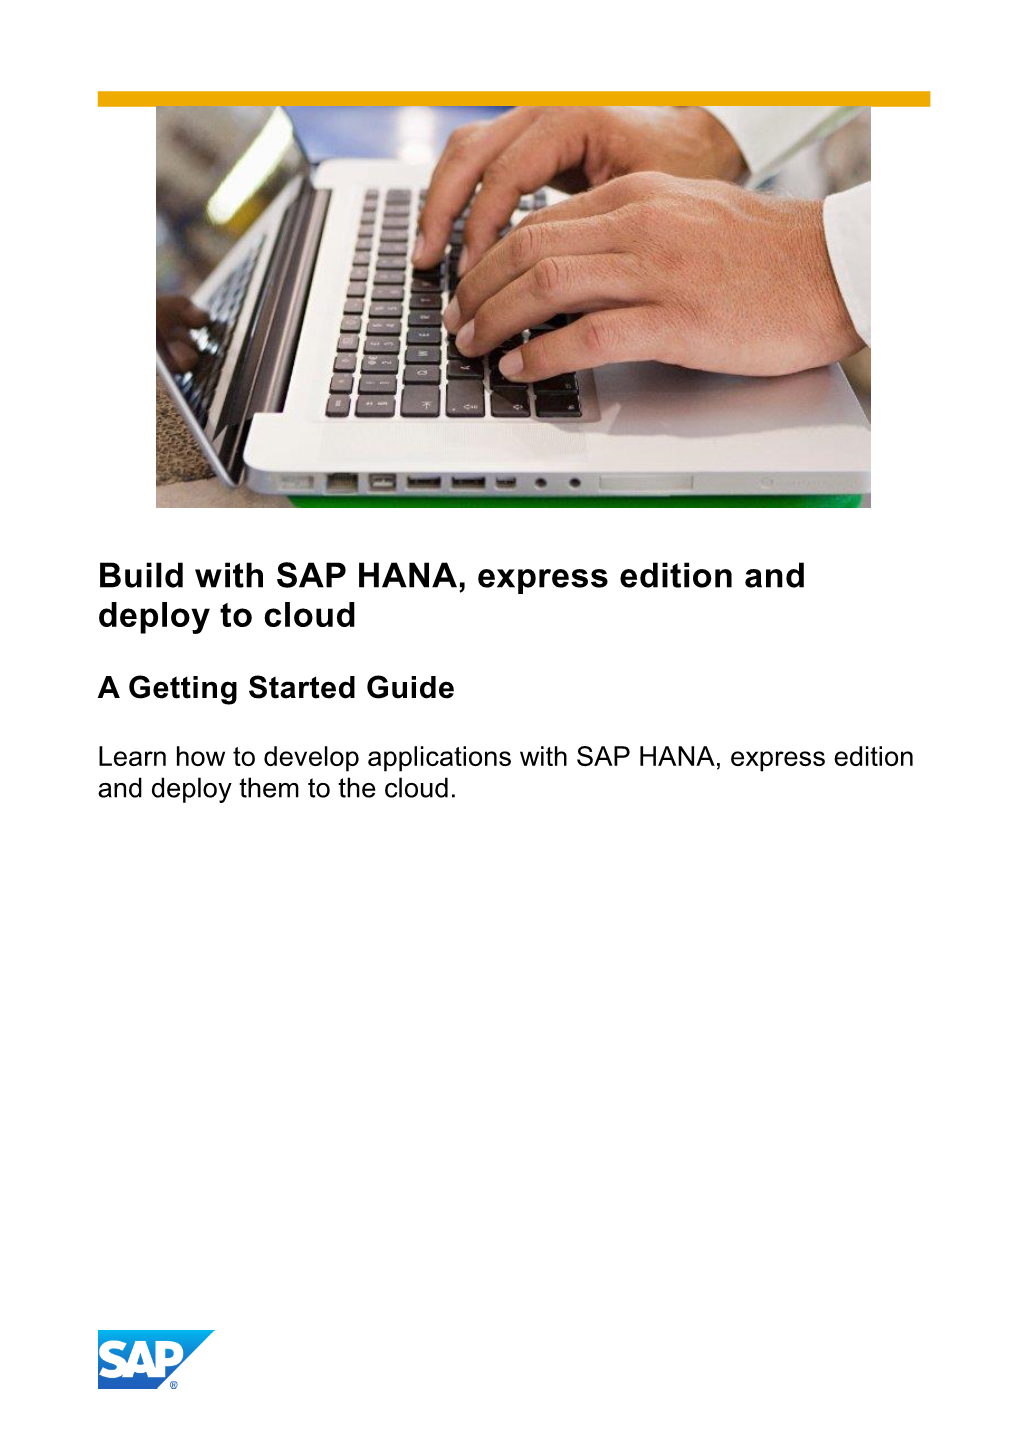 Build with SAP HANA, Express Edition and Deploy to Cloud